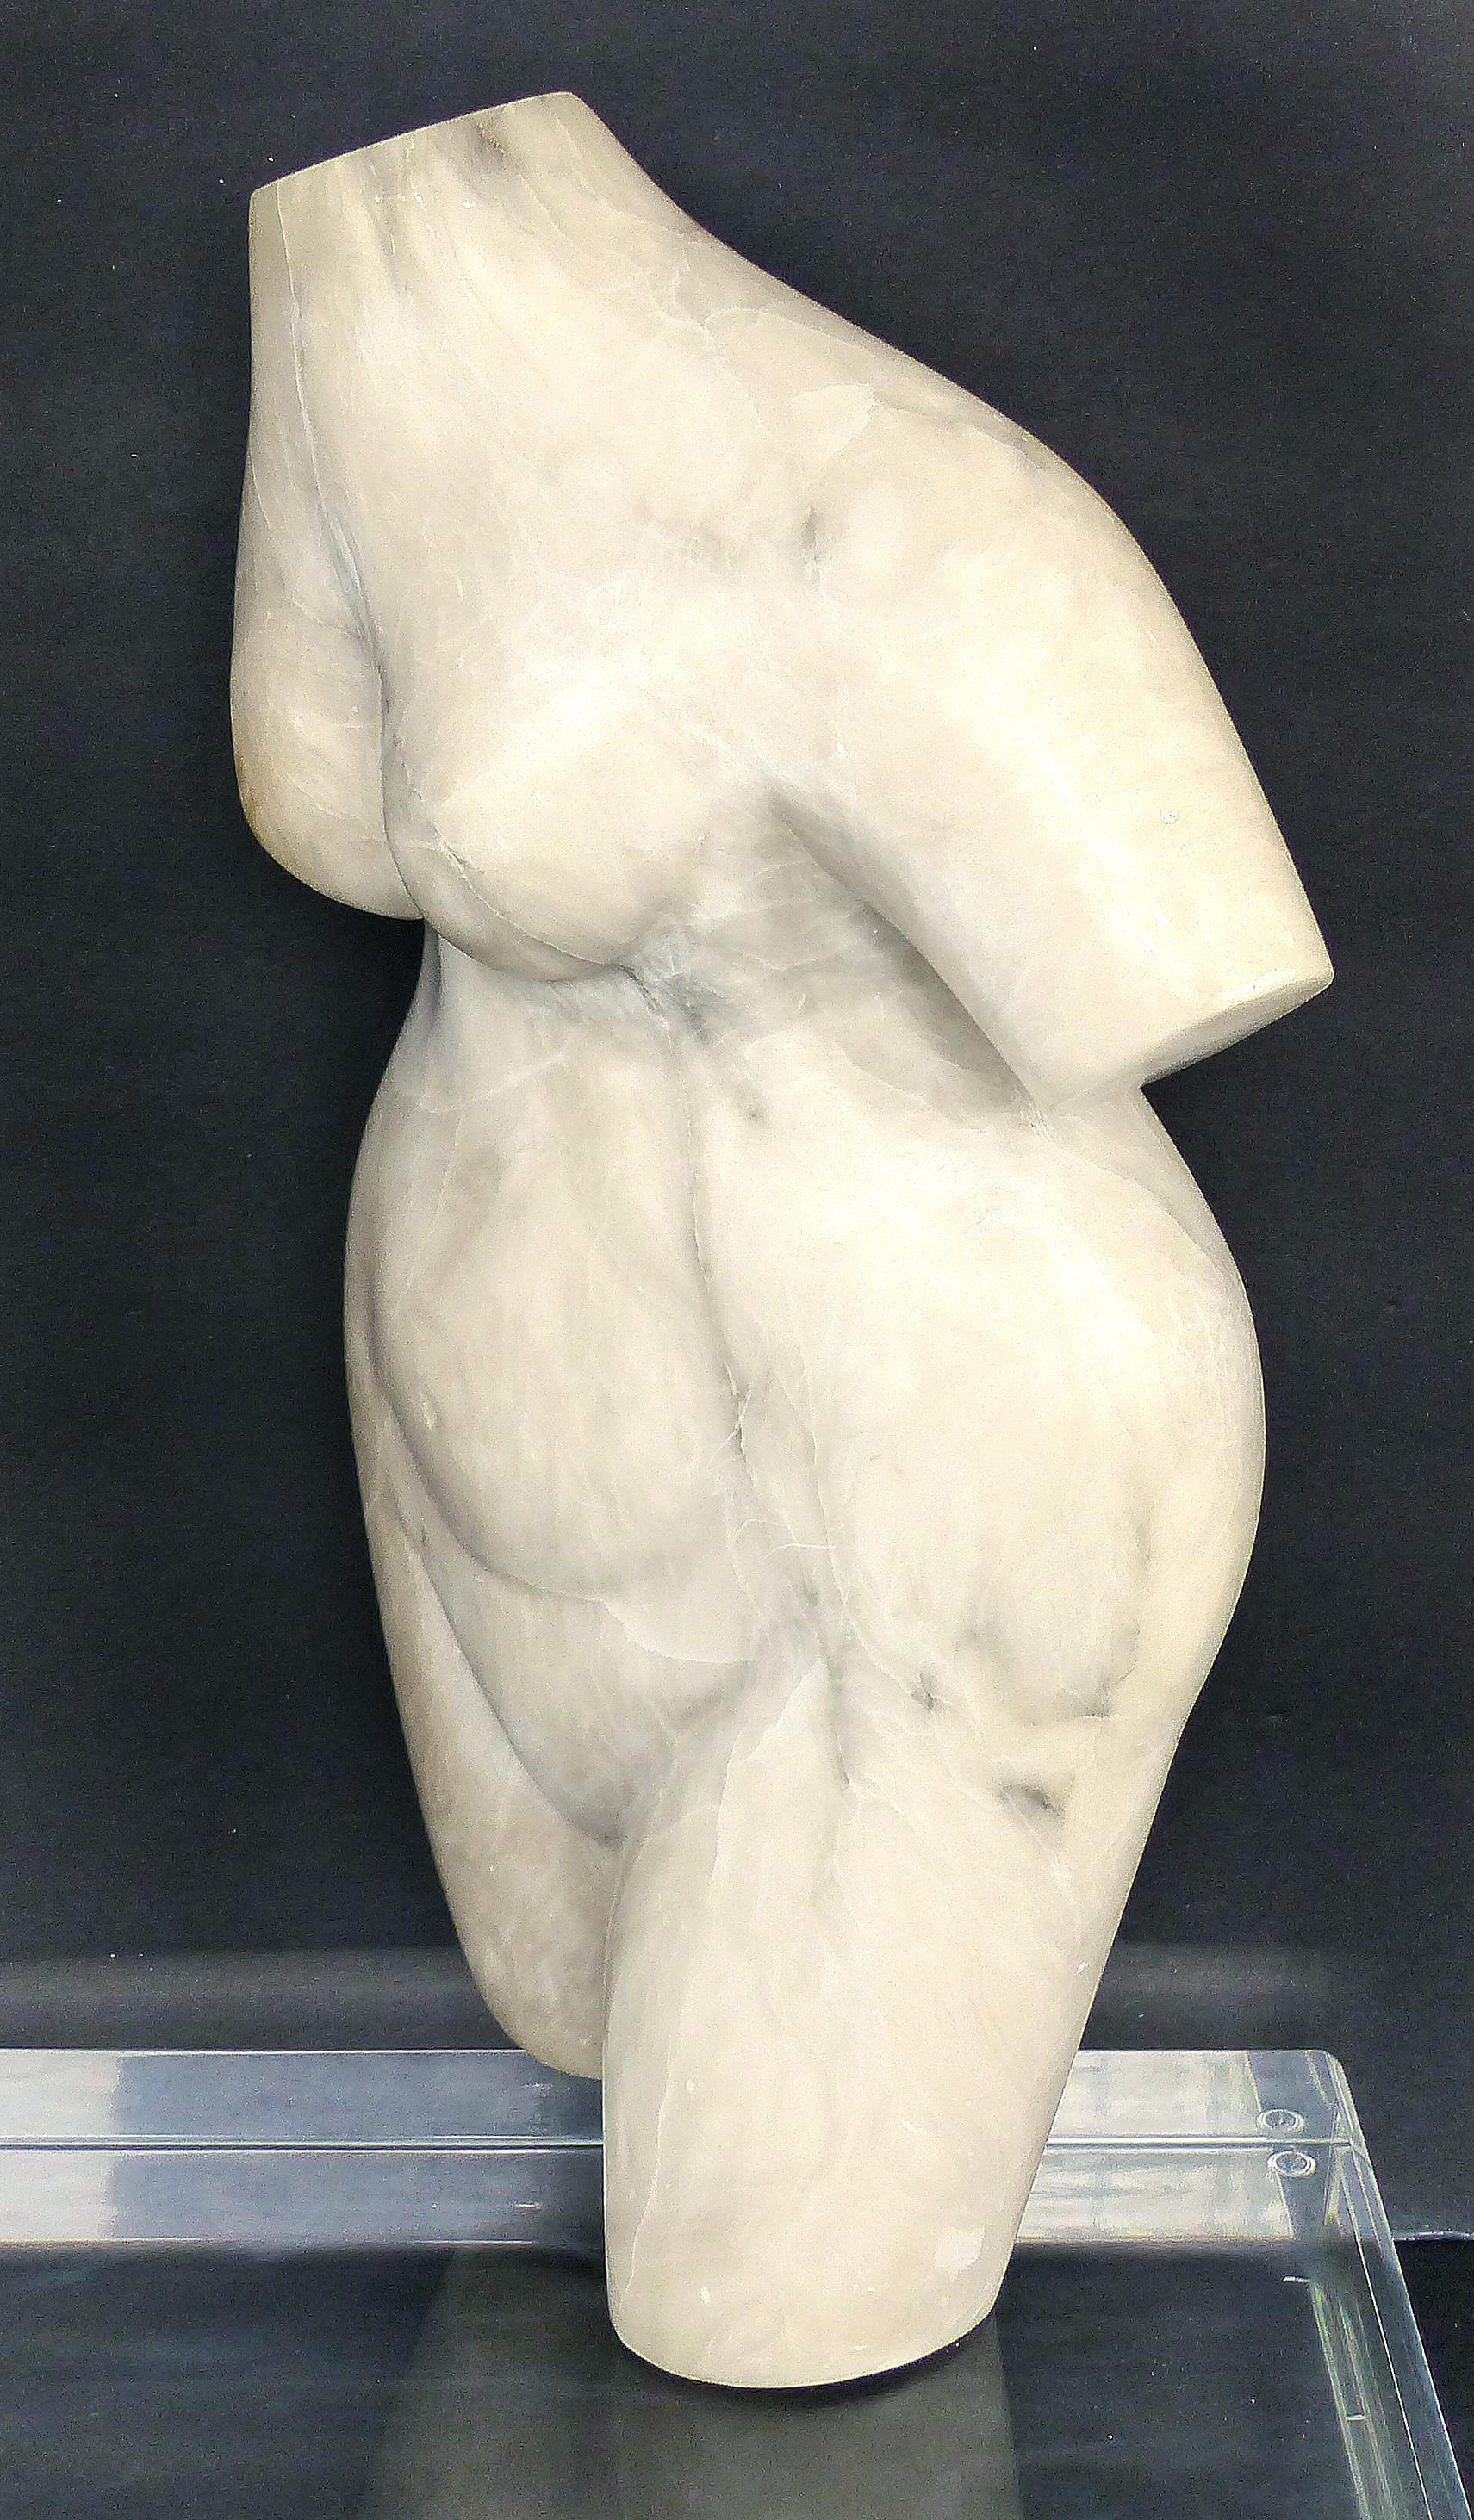 Marble Torso Sculpture on a Lucite Base

Offered for sale is an unsigned carved marble torso sculpture supported by and floating over a thick Lucite base. The marble torso is easily removed from the base and can be positioned as desired by rotating